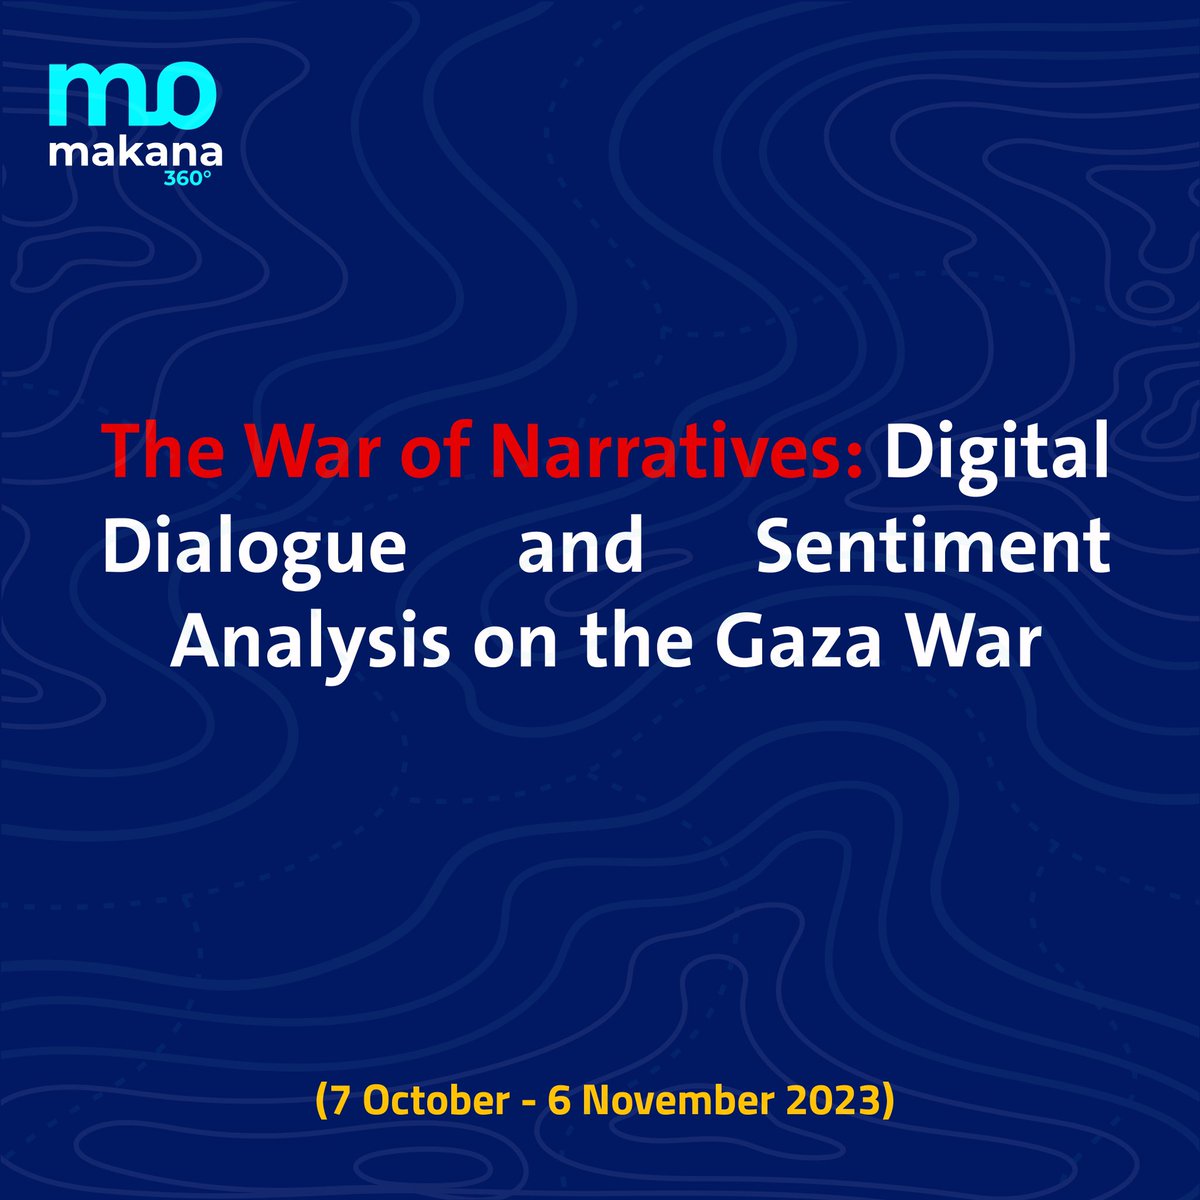 “The War of Narratives: Digital Dialogue and Sentiment Analysis on the #Gaza War” - A comprehensive report by Makana 360, uncovering the shifts in global digital discourse from 7 October to 6 November 2023.  #DigitalDialogue #SentimentAnalysis